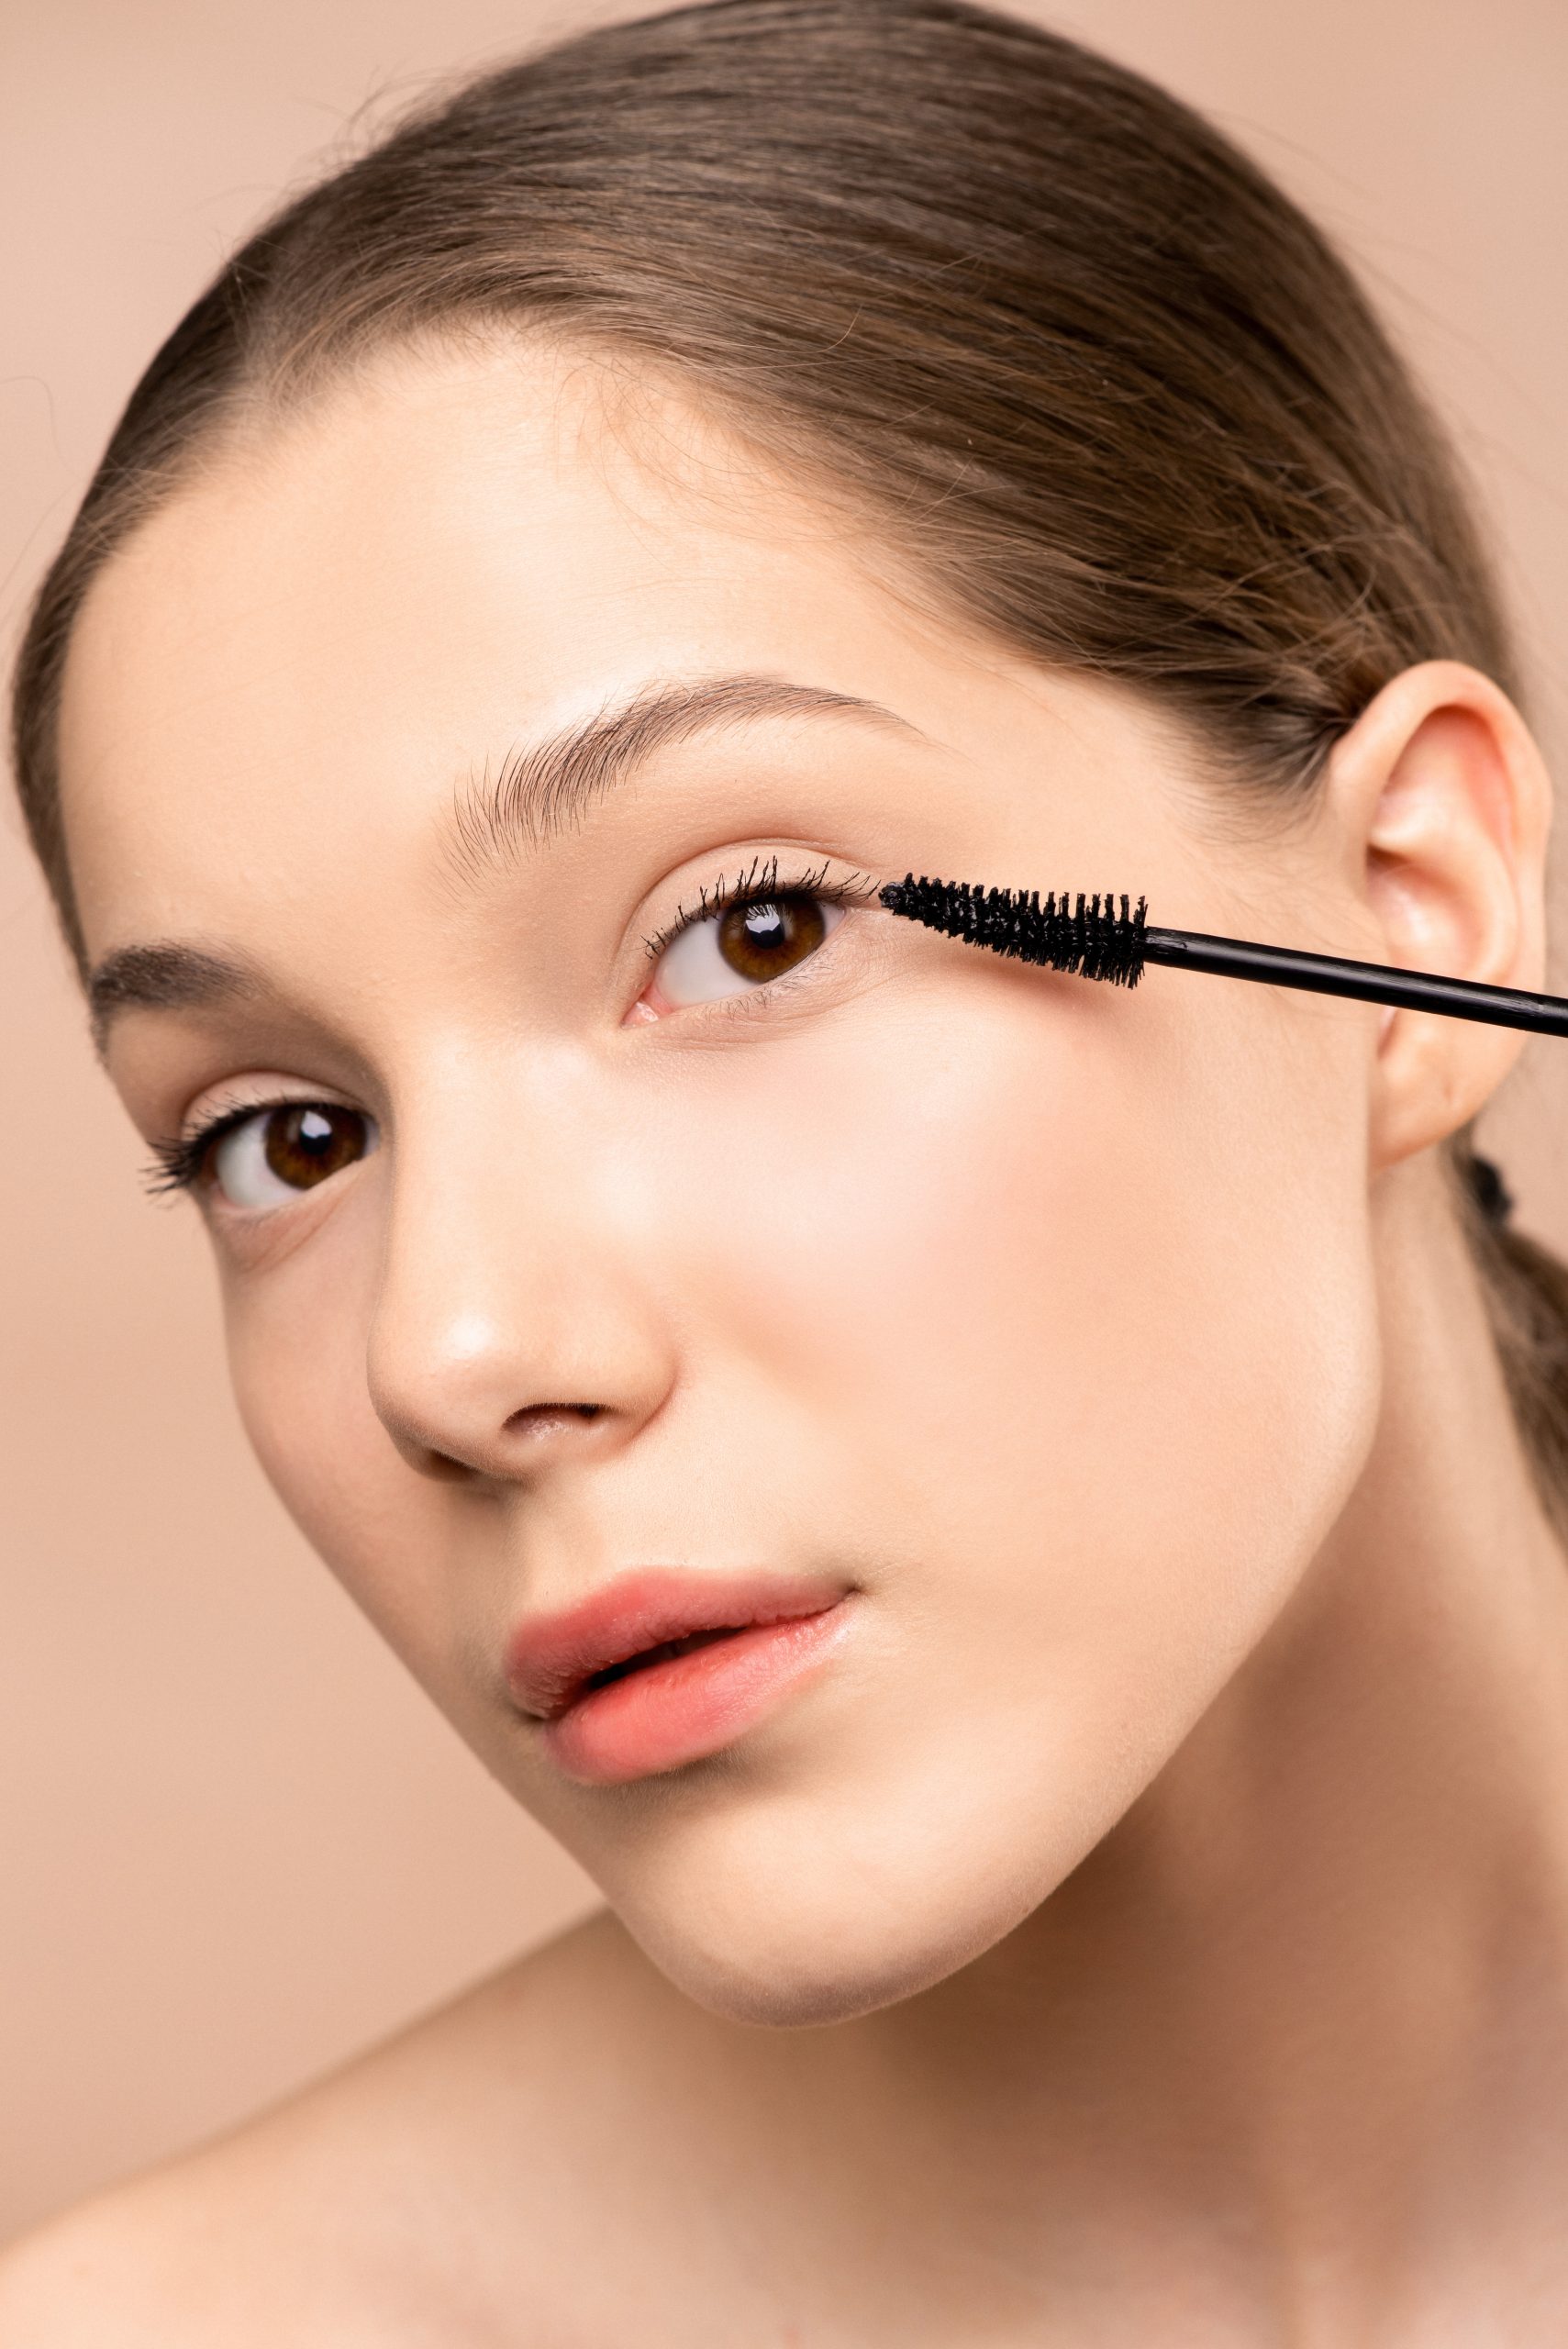 How Is A Brow Lift Procedure Done? 